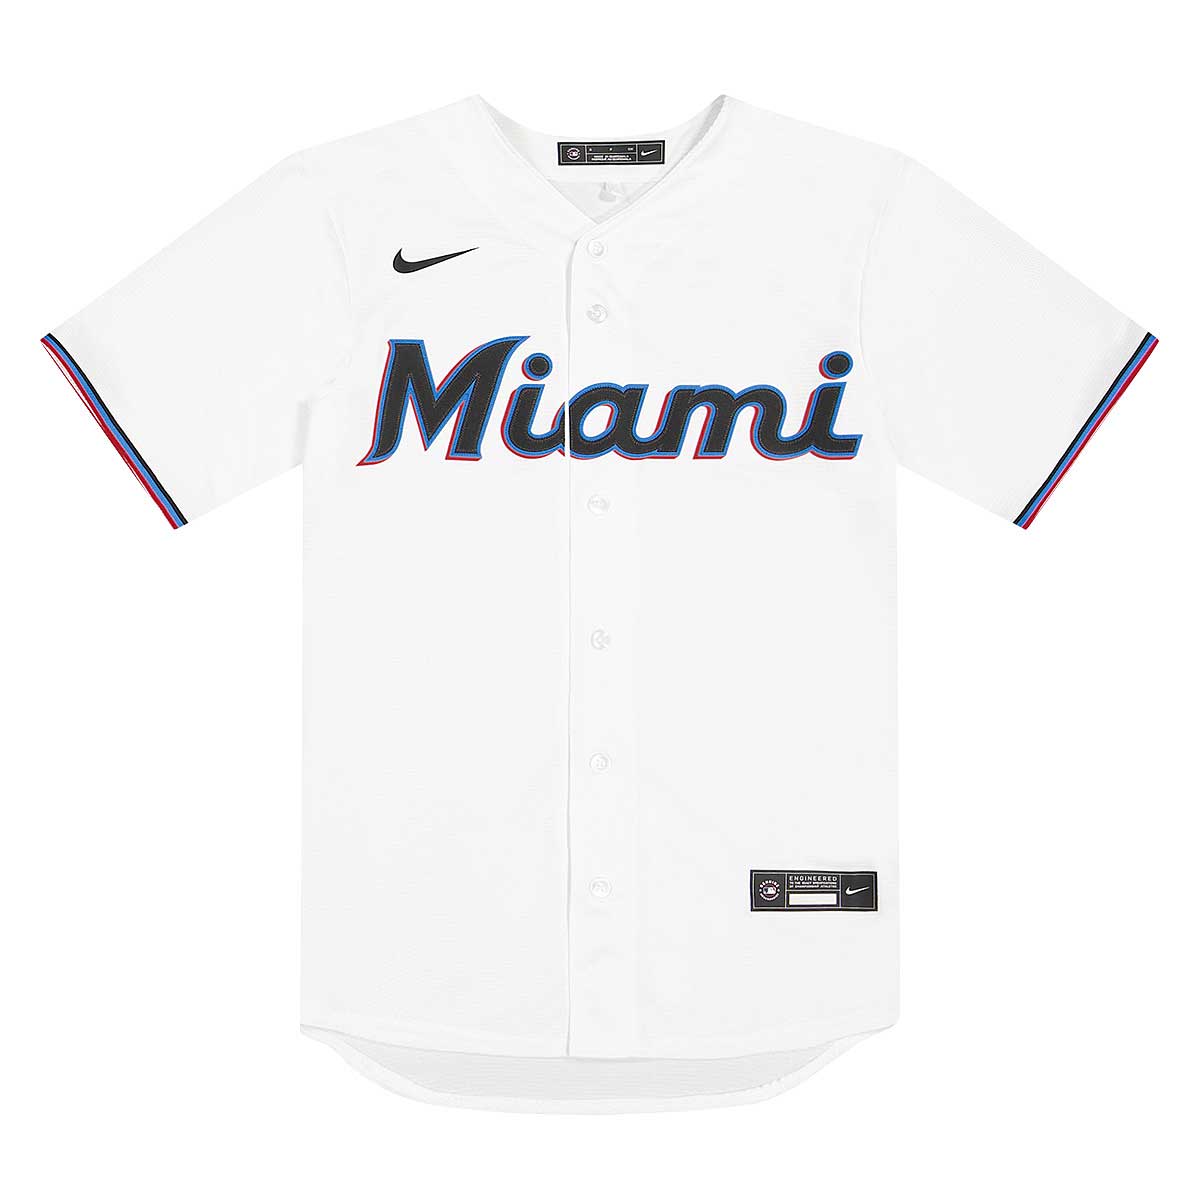 Youth Miami Marlins Majestic White Home Official Team Jersey